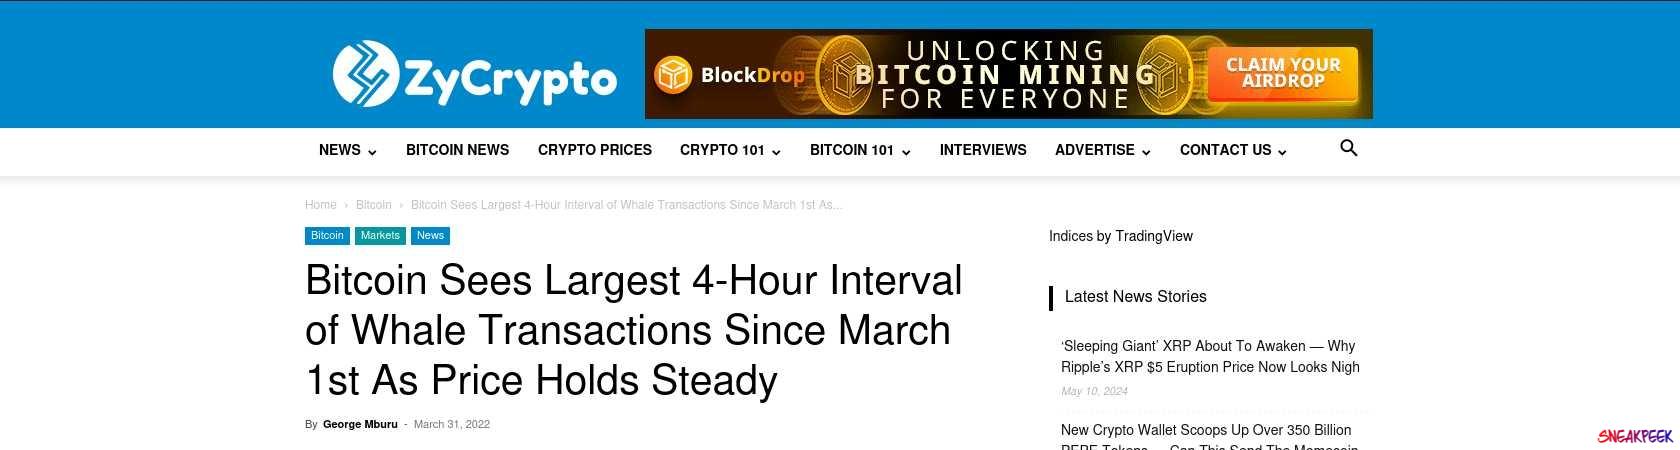 Read the full Article:  ⭲ Bitcoin Sees Largest 4-Hour Interval of Whale Transactions Since March 1st As Price Holds Steady